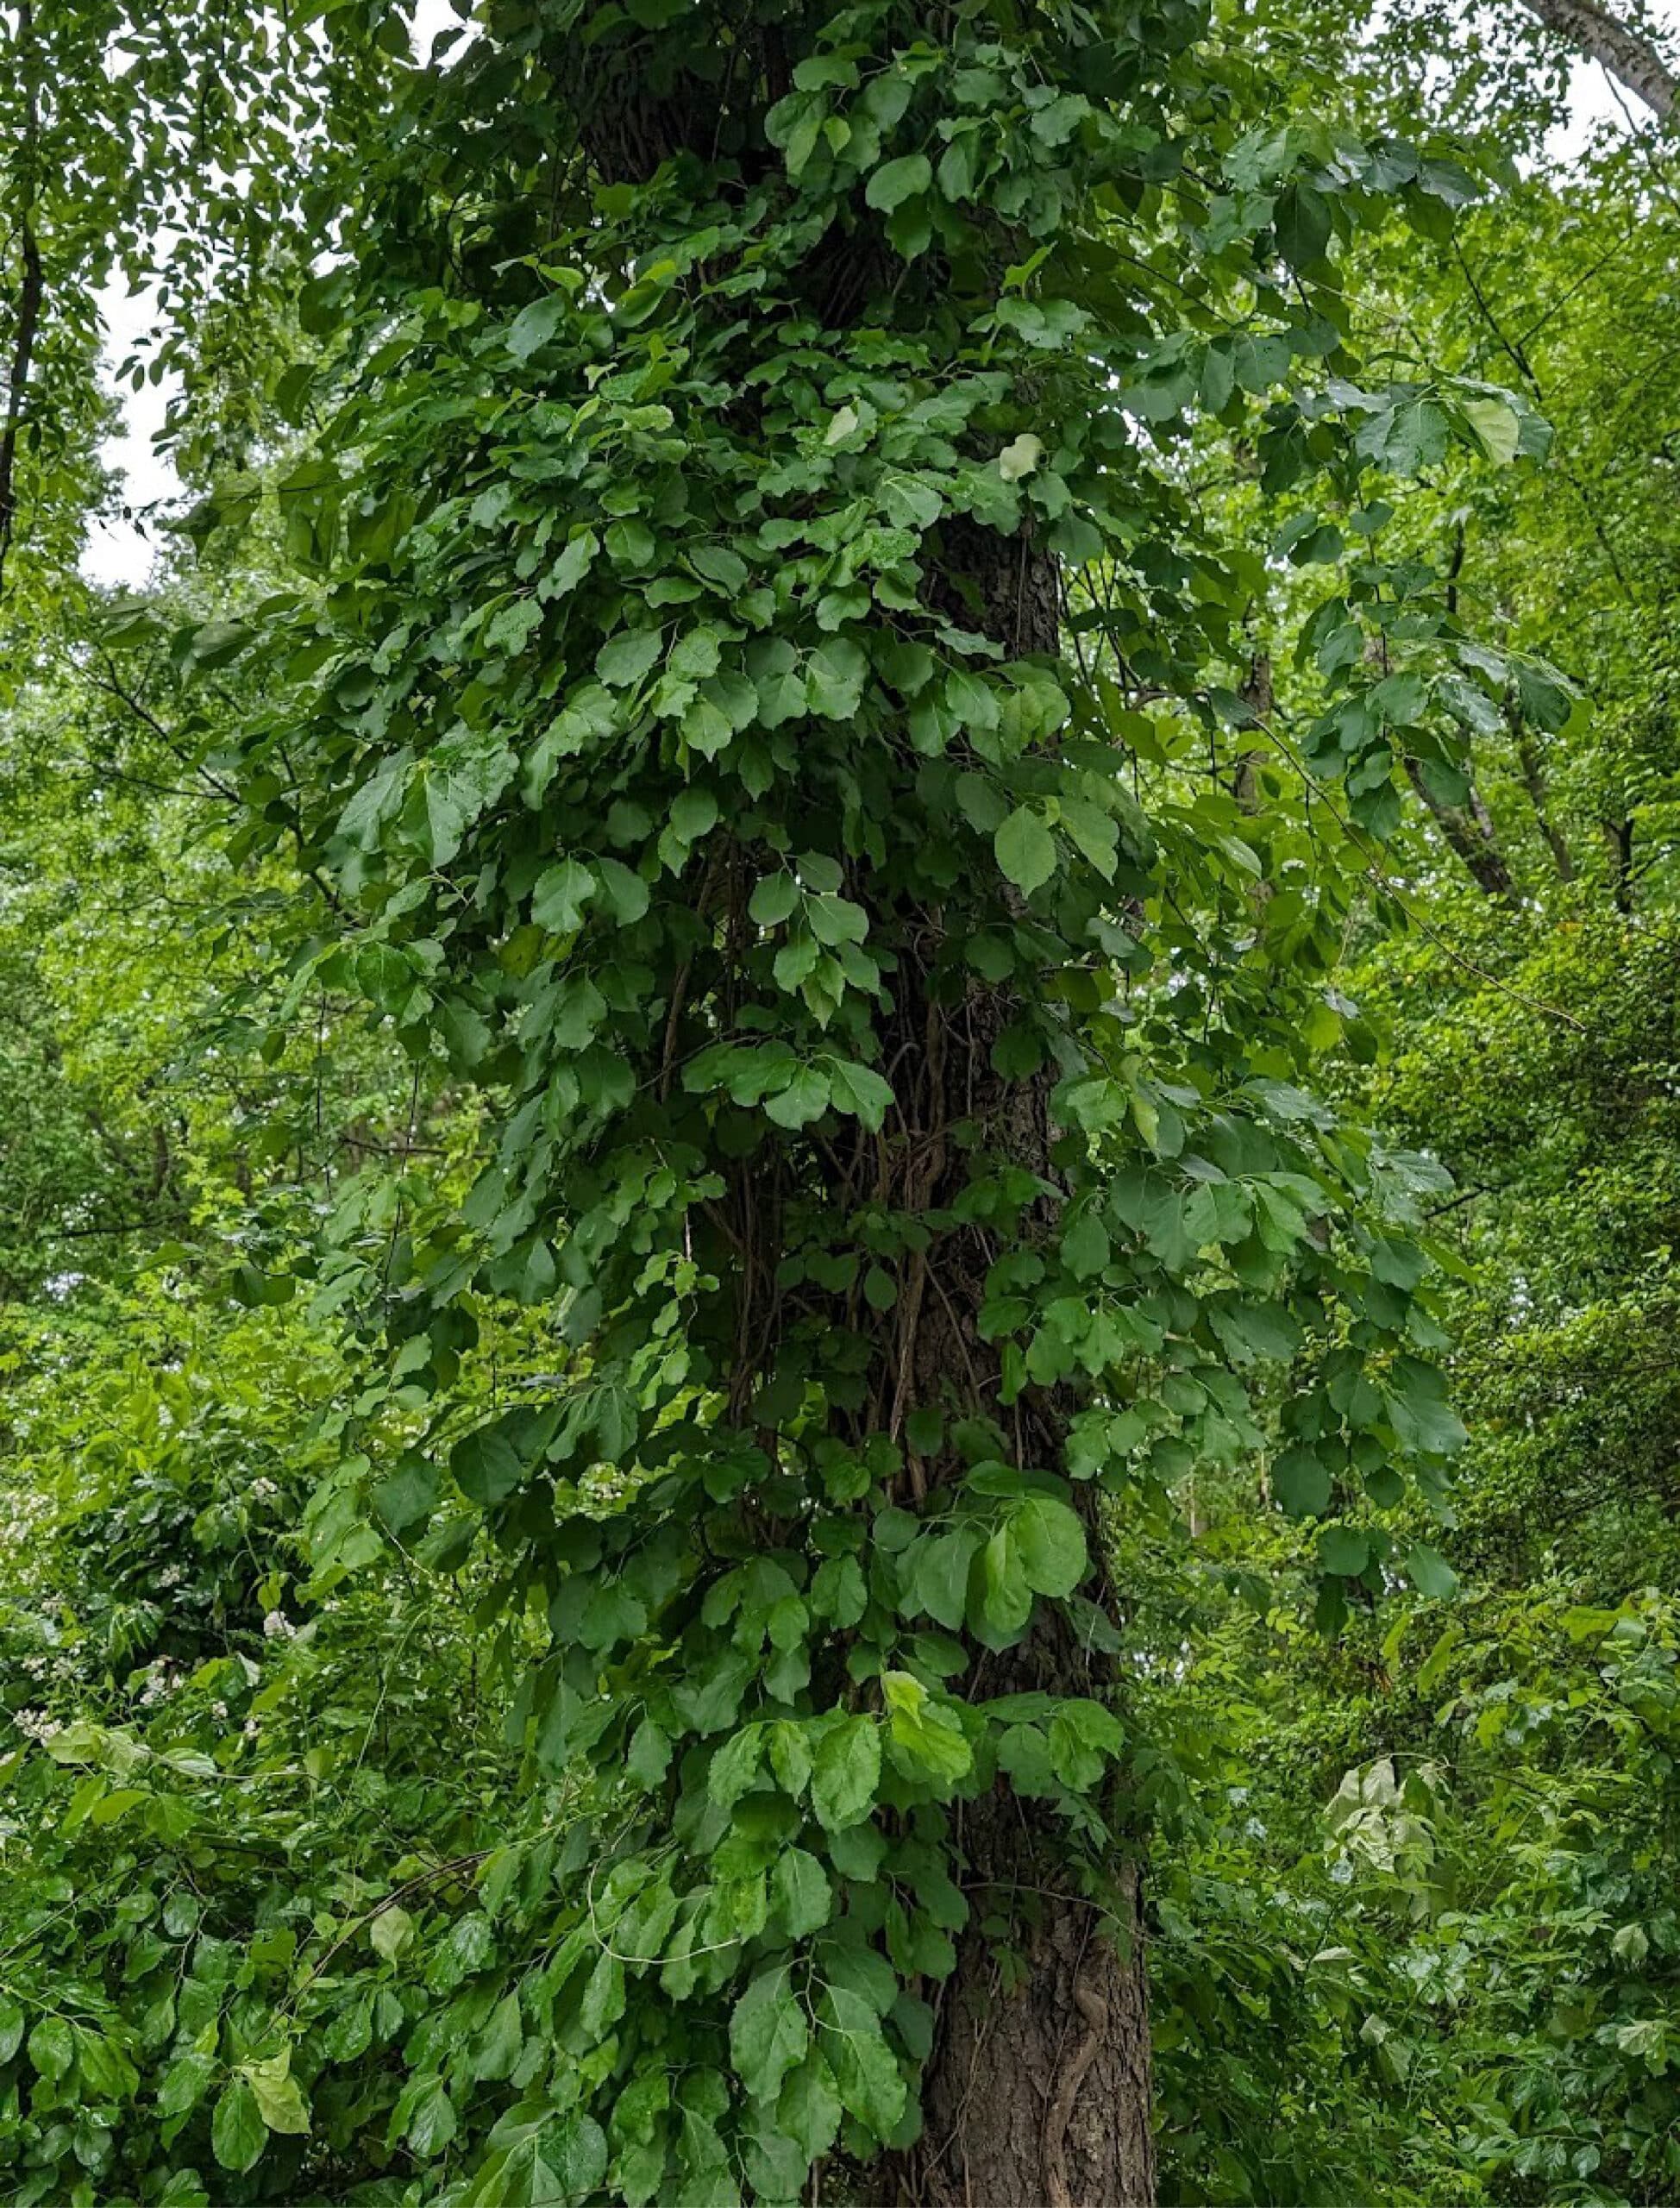 Dense growth of vines and leaves climbing up a tree trunk